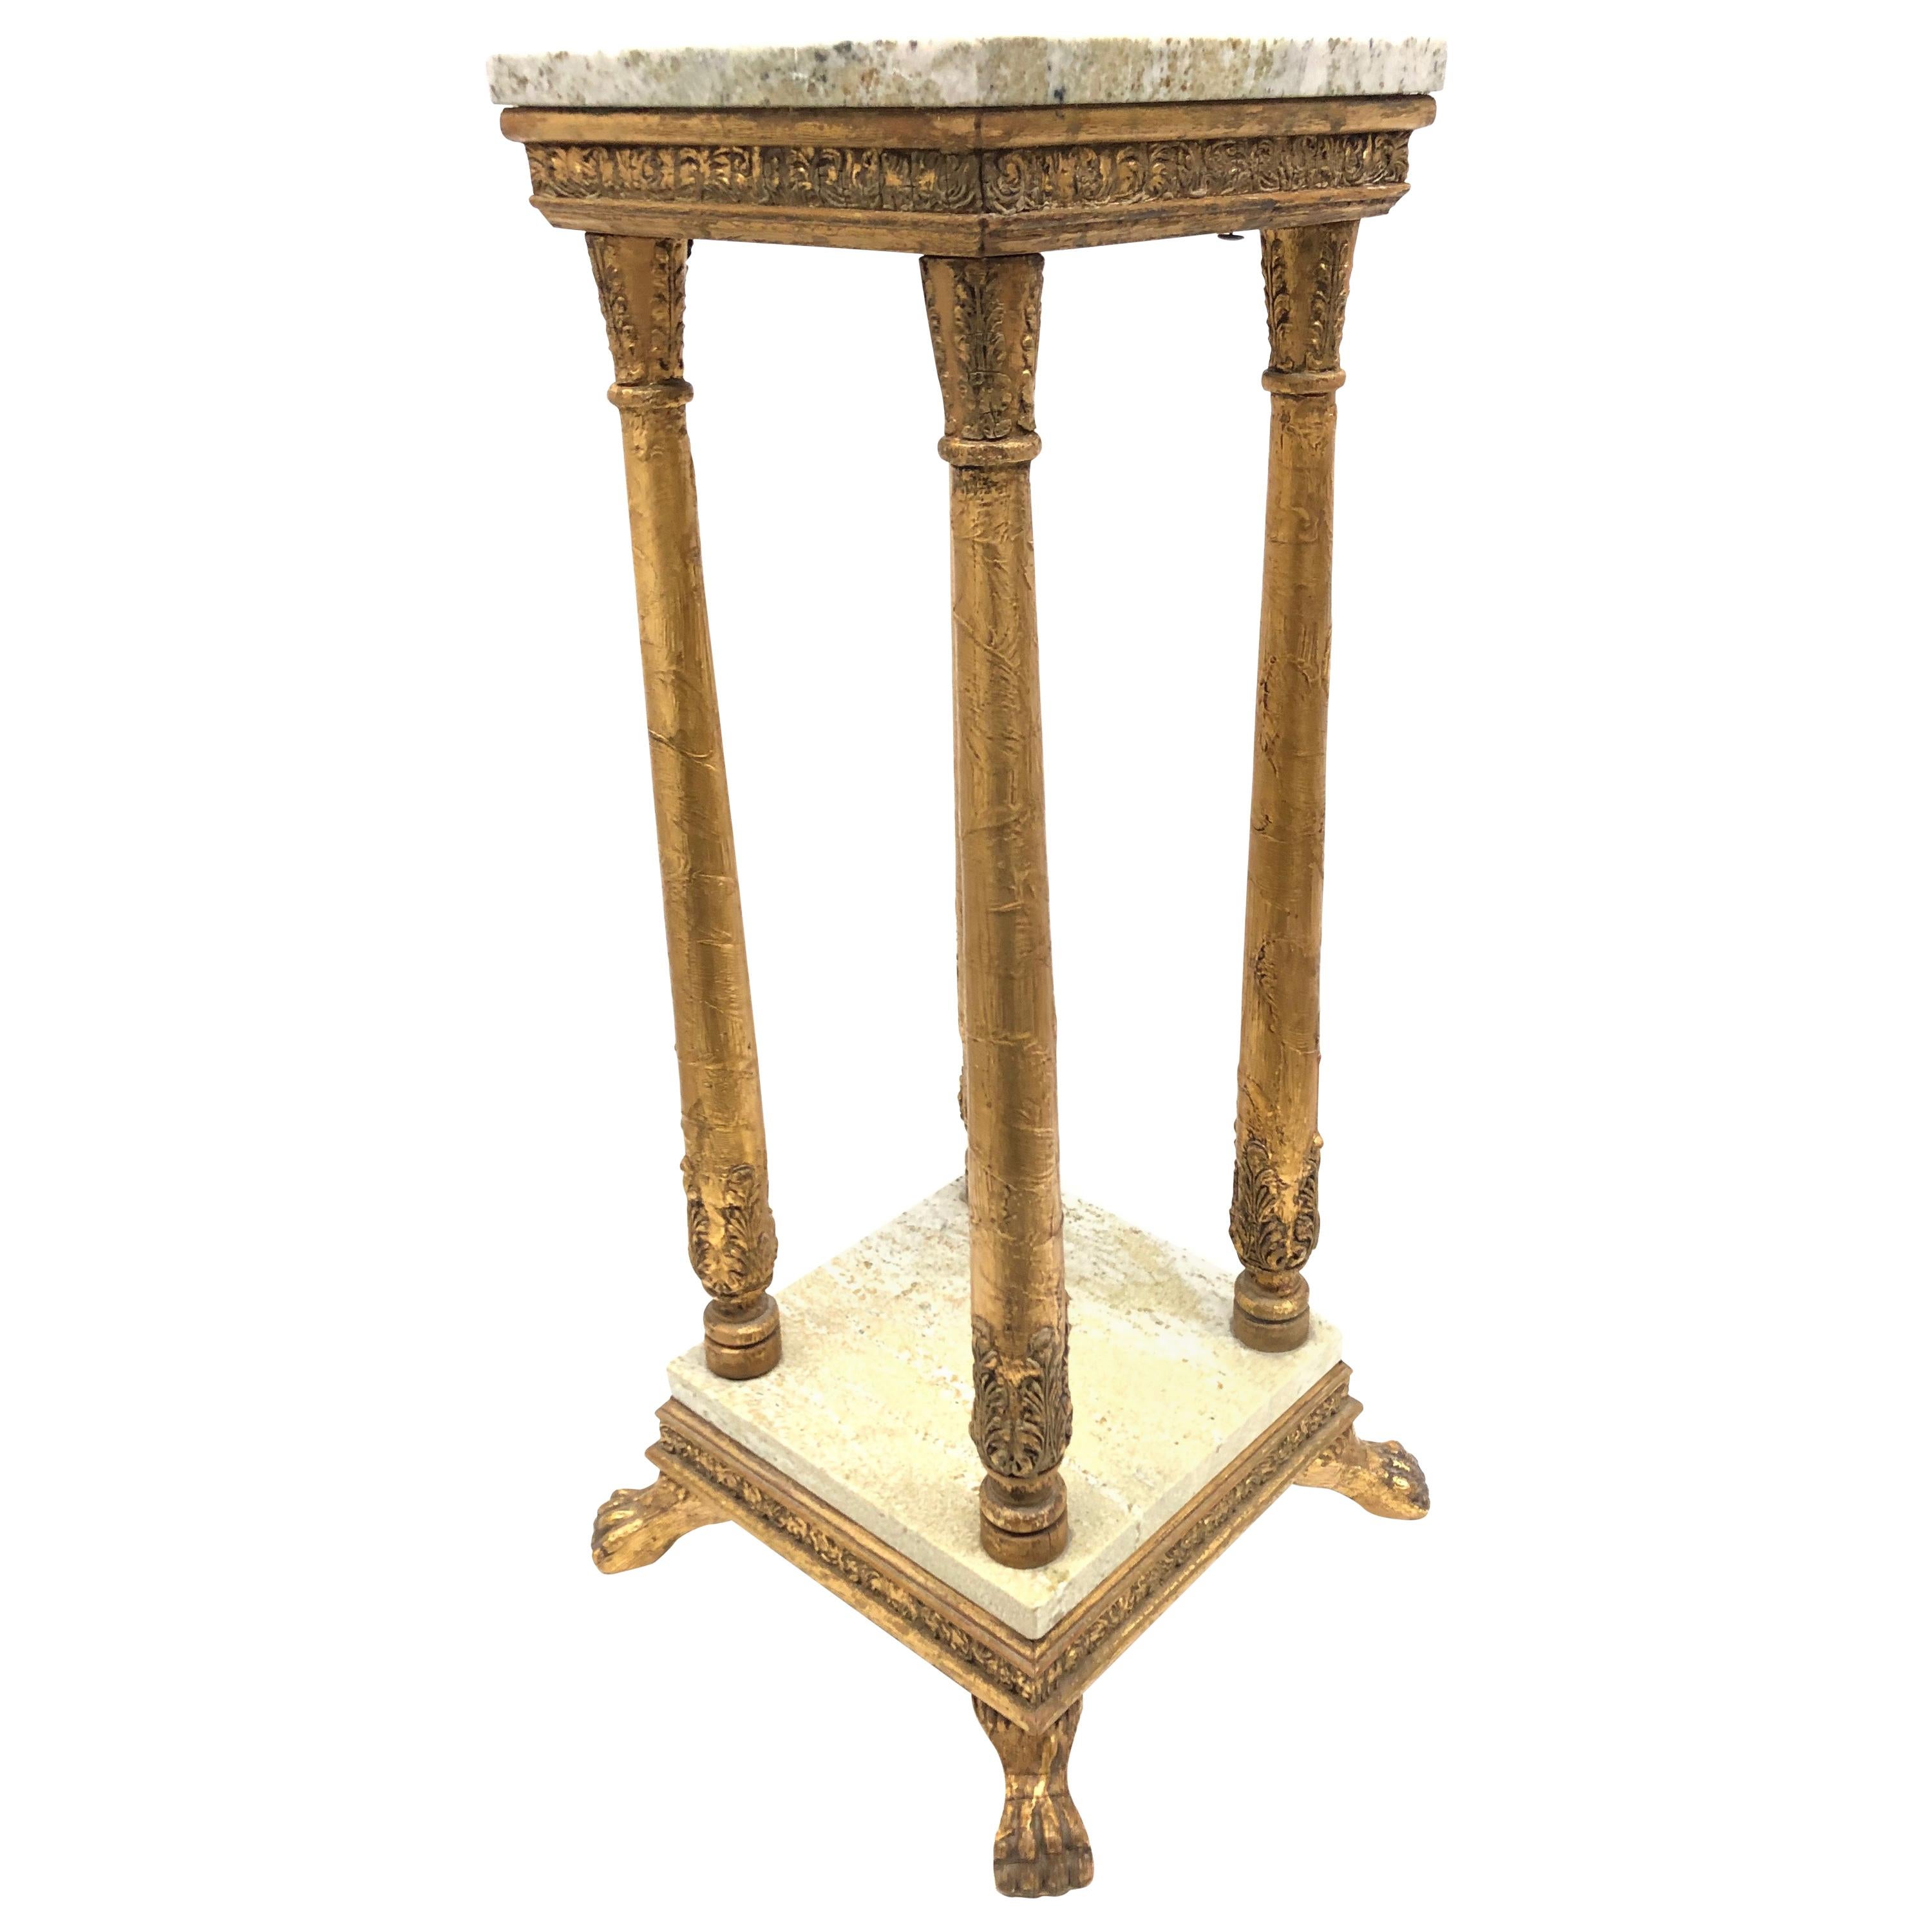 Late 19th Century Carved Gilt wood Tole ware Console Pedestal Table German